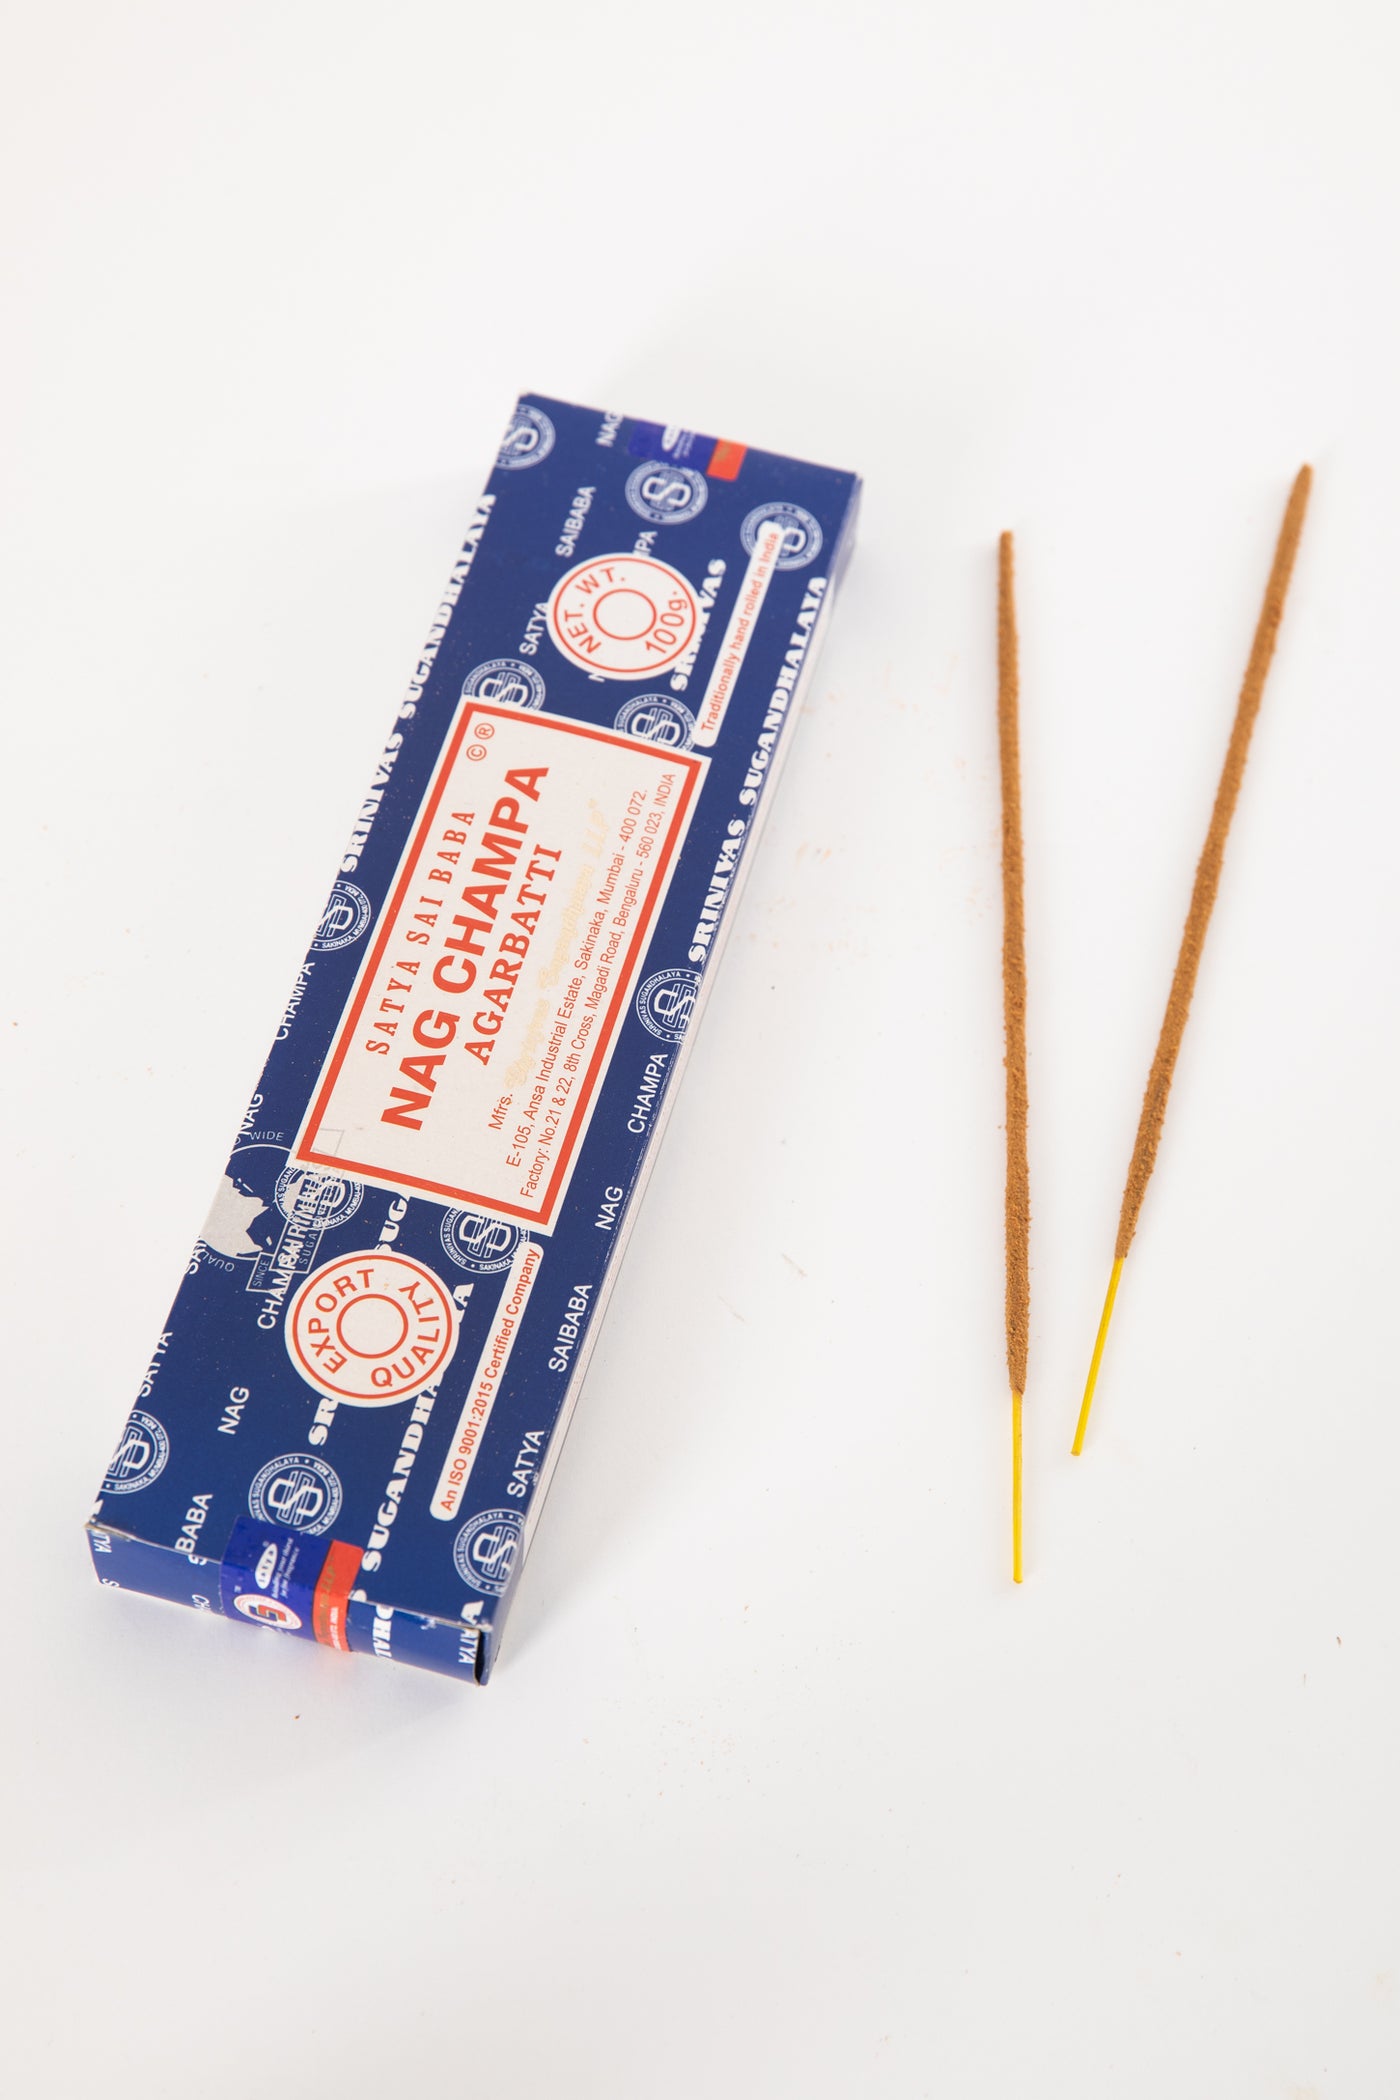 Nag Champa Candle (Famous Indian Incense)